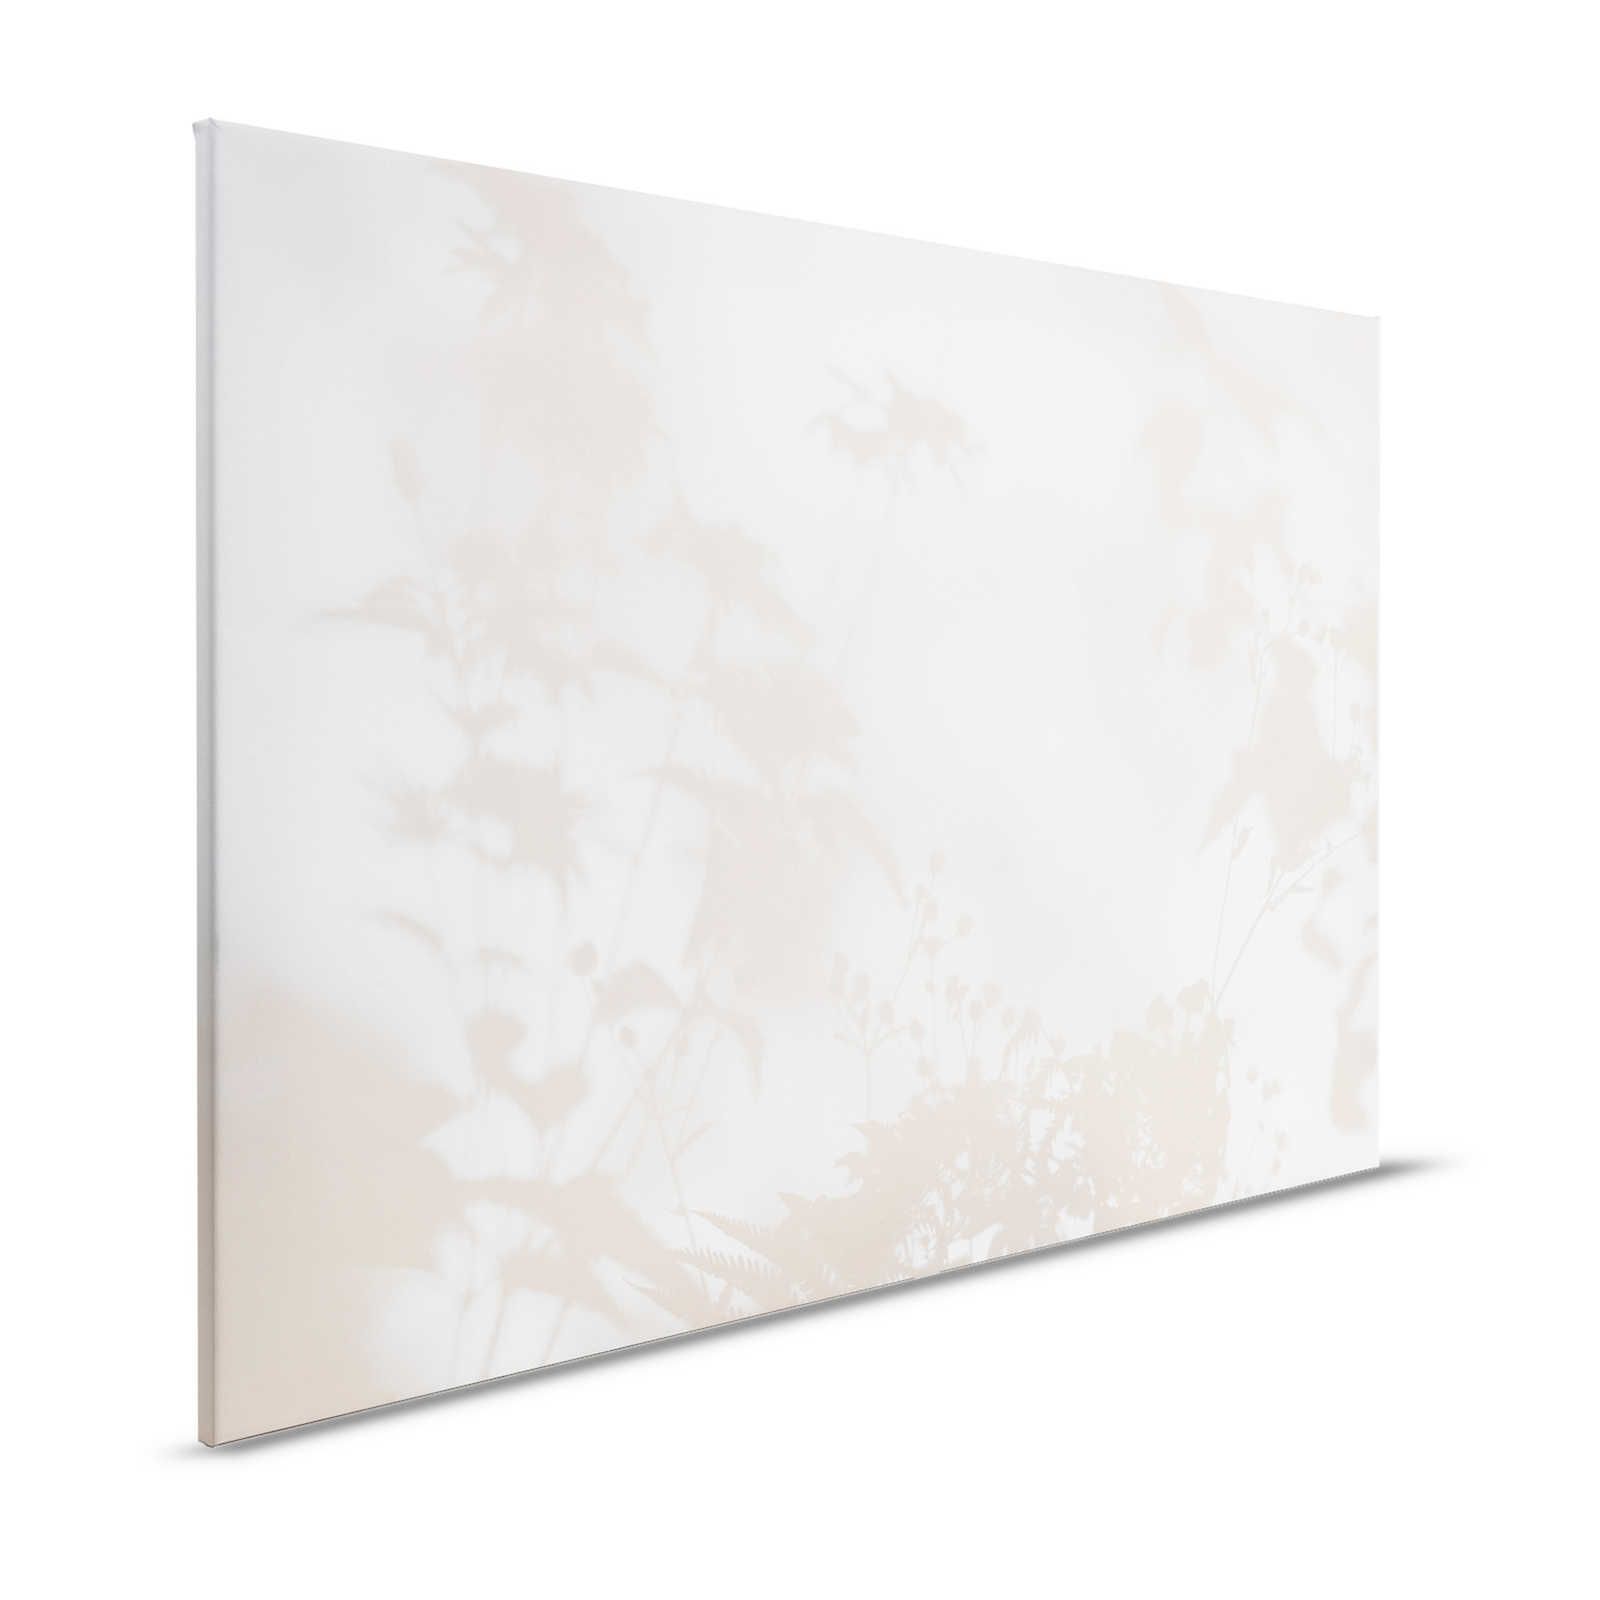 Shadow Room 1 - Nature Canvas painting Beige & White, faded design - 1.20 m x 0.80 m
